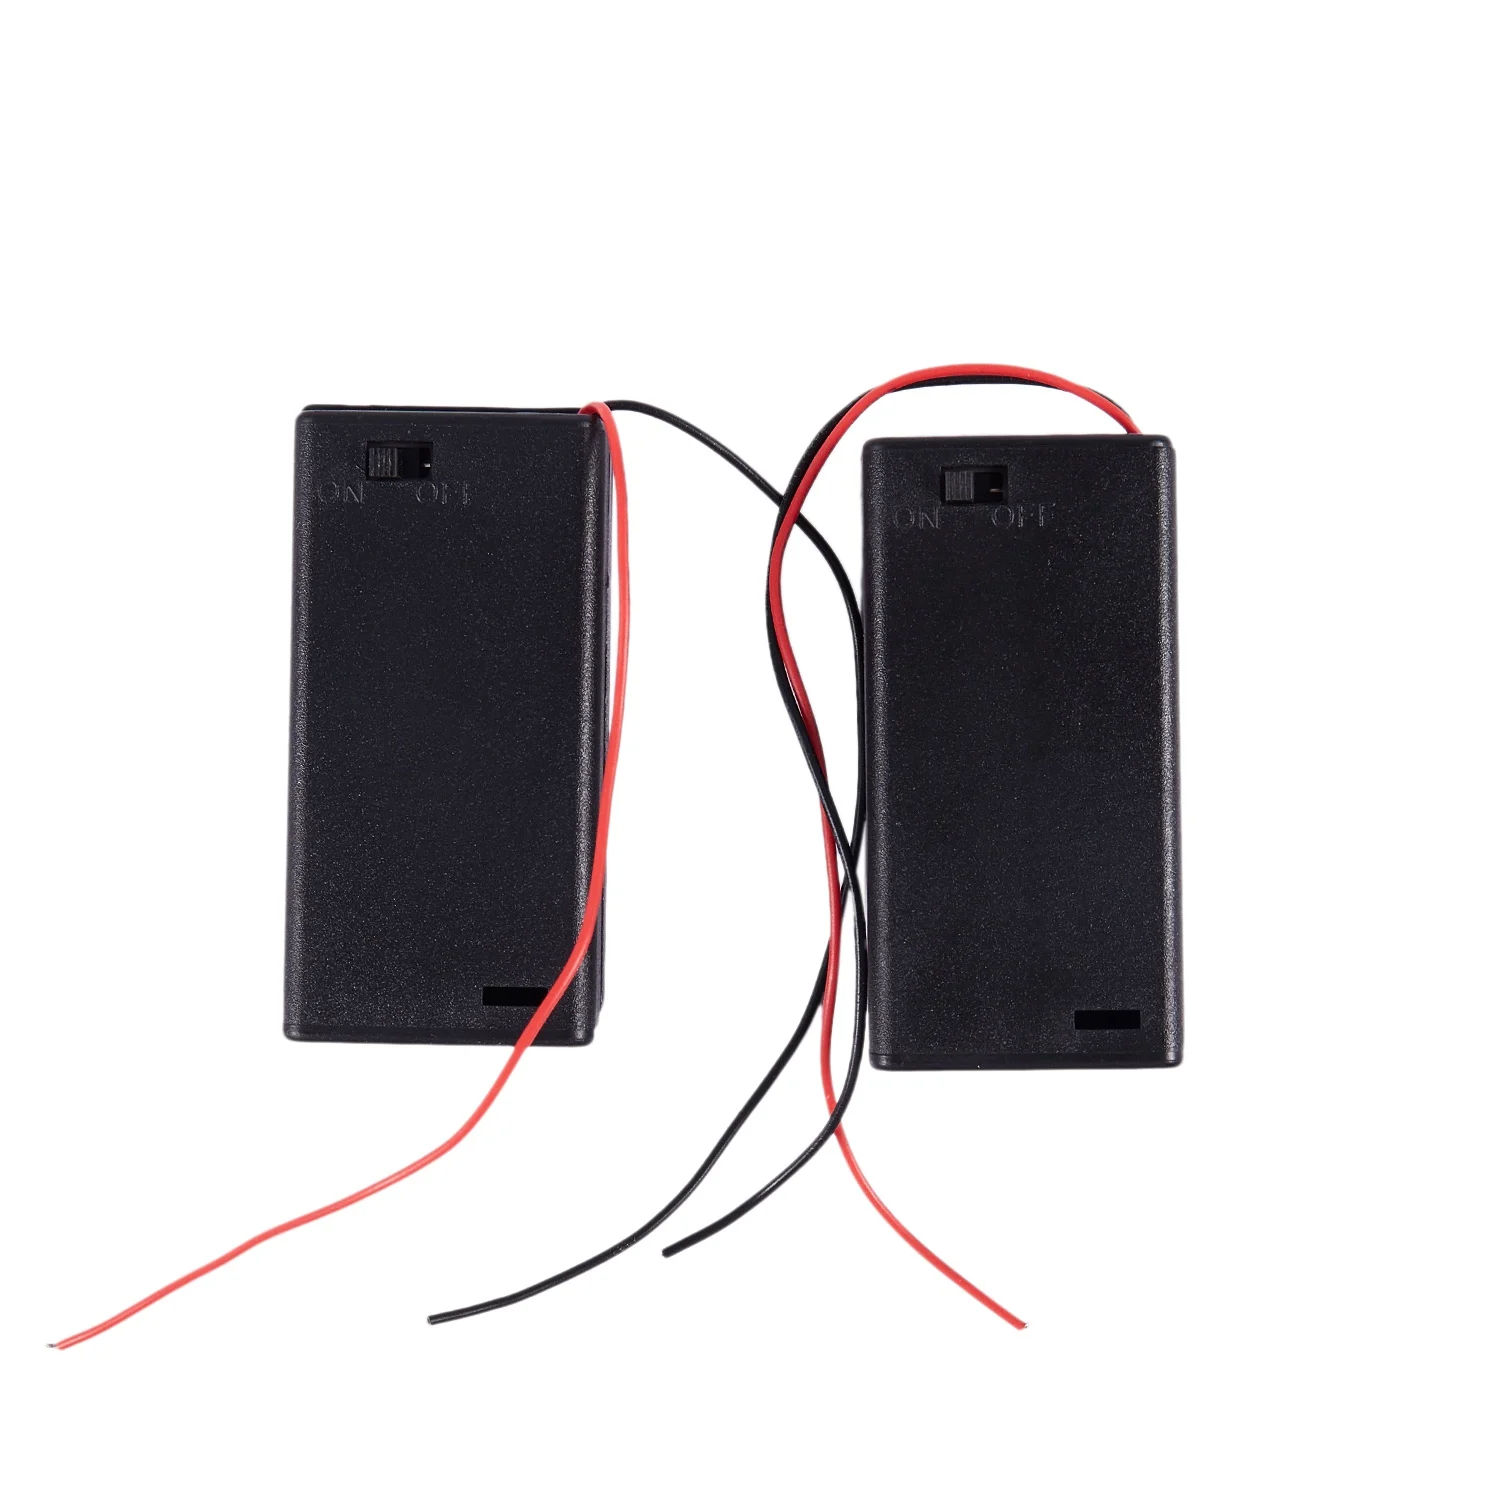 

2 X AA 3V Battery Holder Case Box Slot Wired ON/OFF Switch W Cover